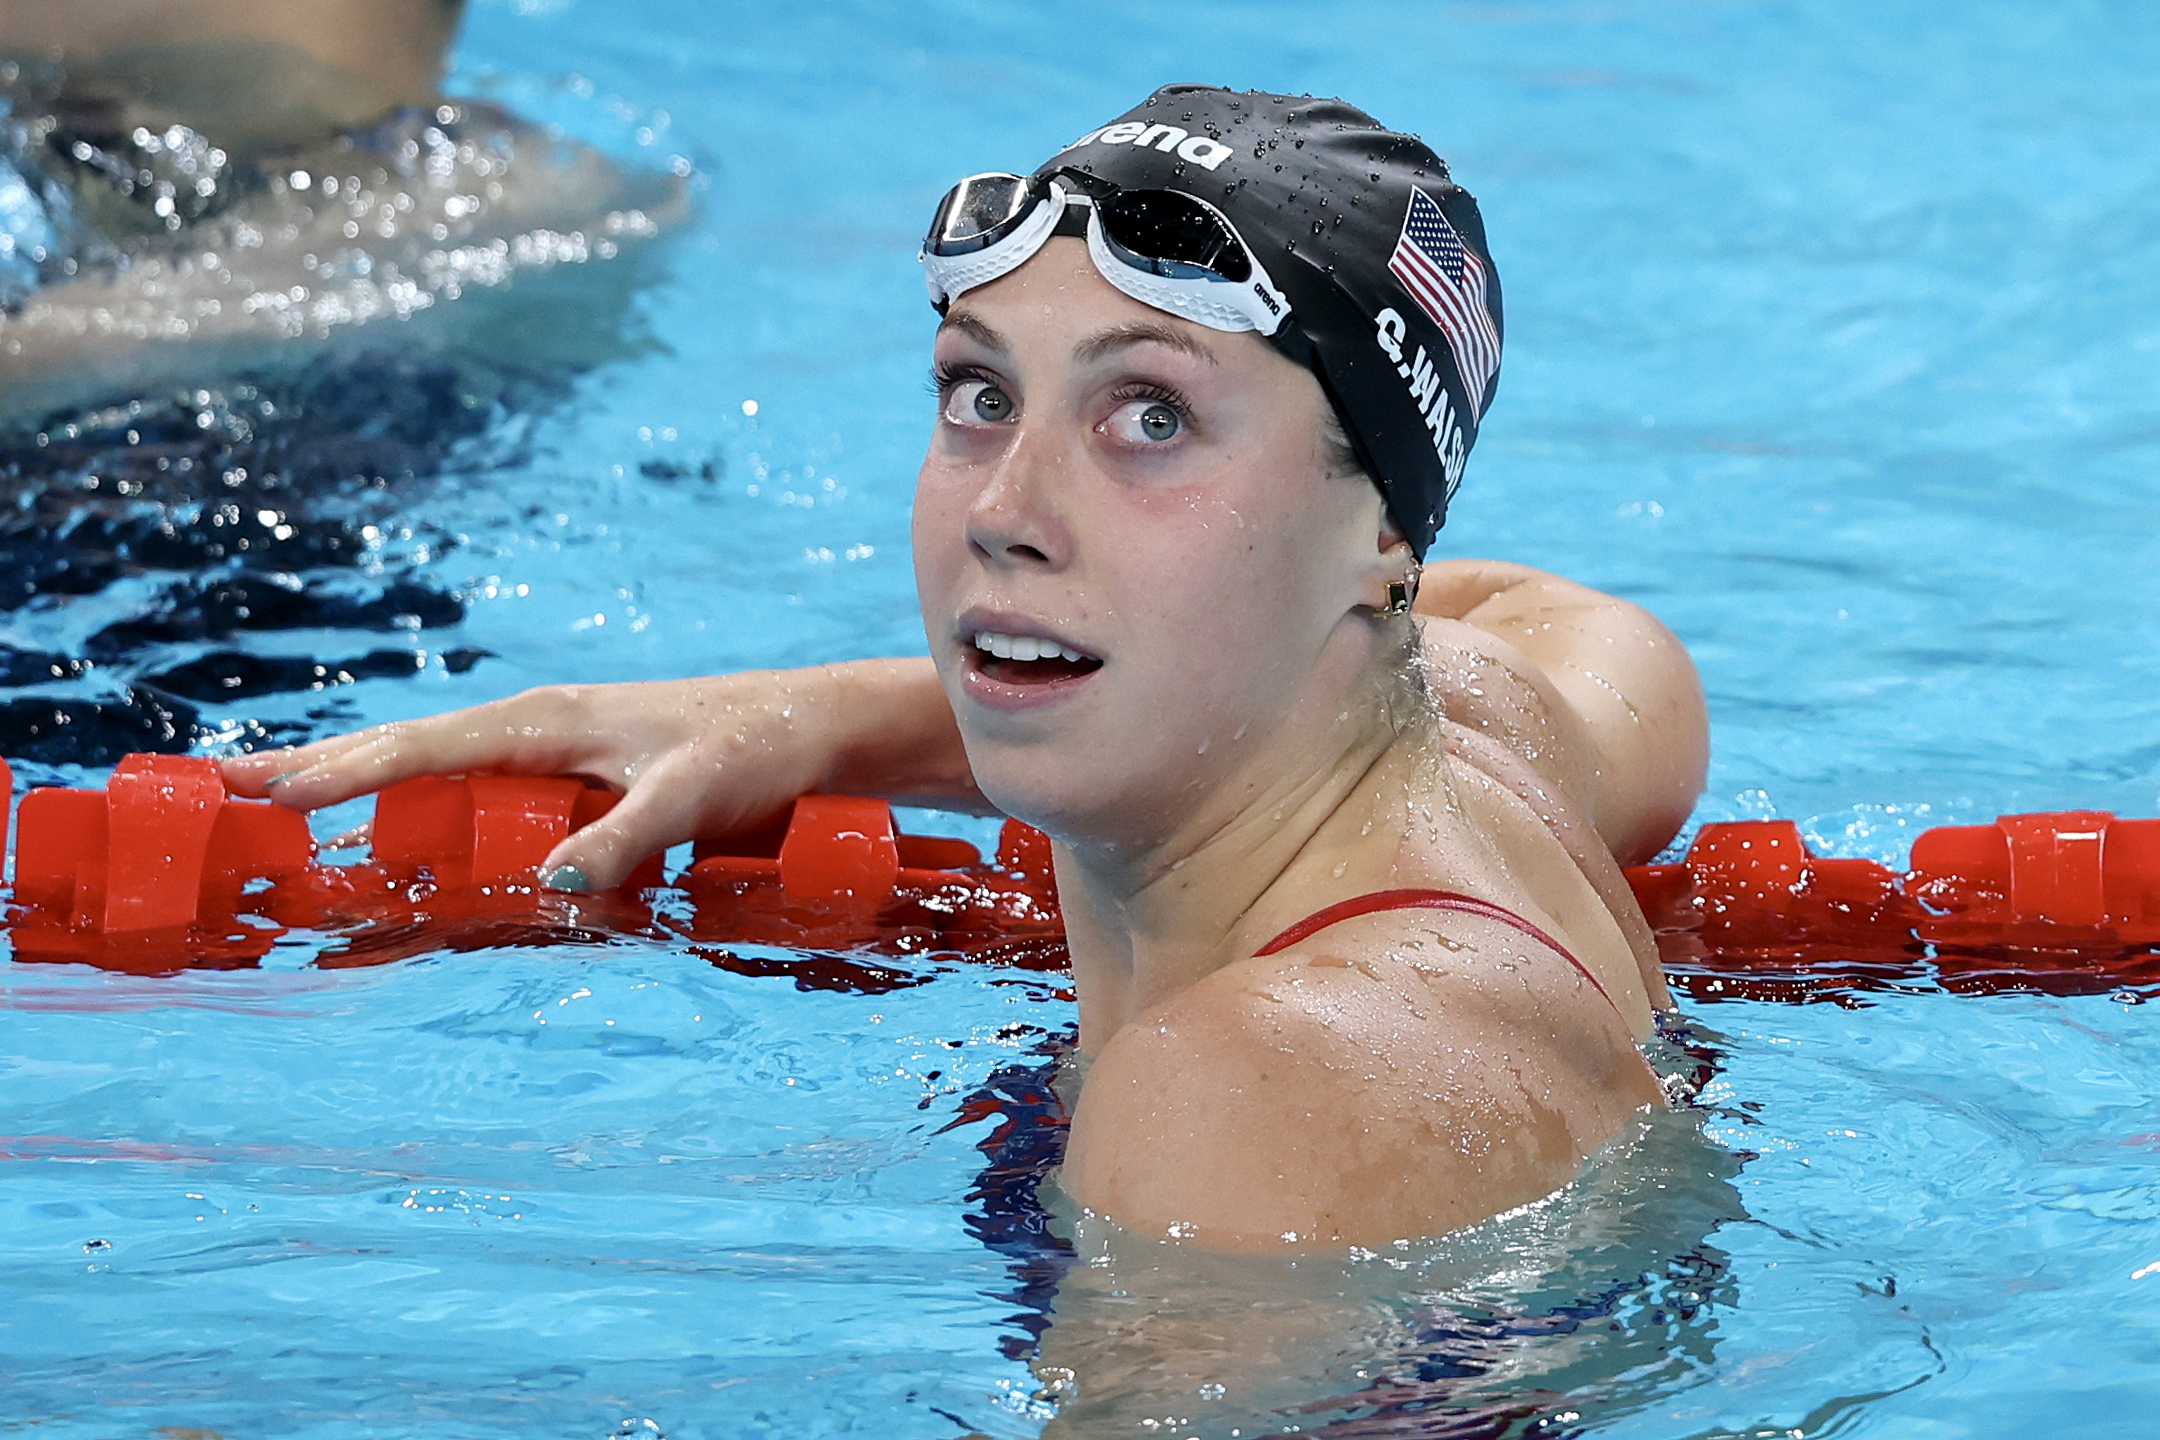 UVA's Gretchen Walsh sets Olympic record in 100m butterfly semifinals